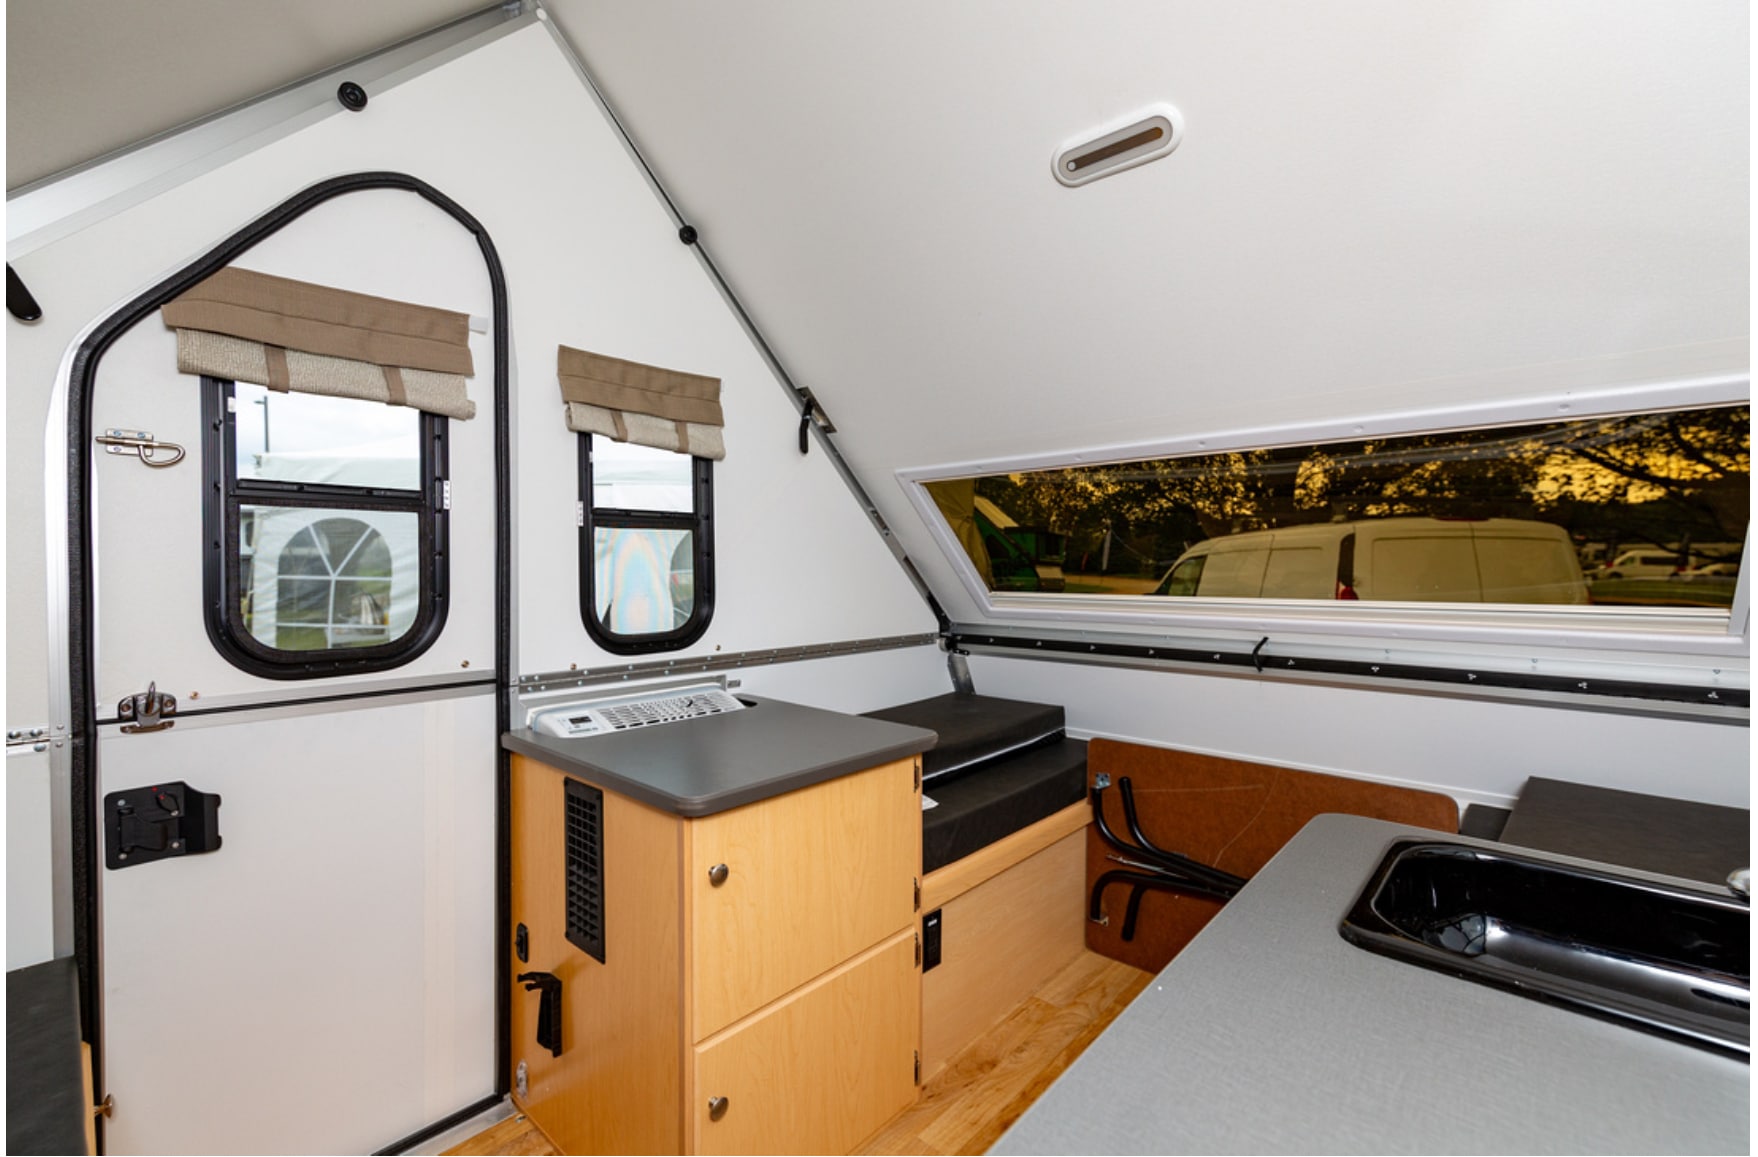 The interior of an rv with a sink and a stove.